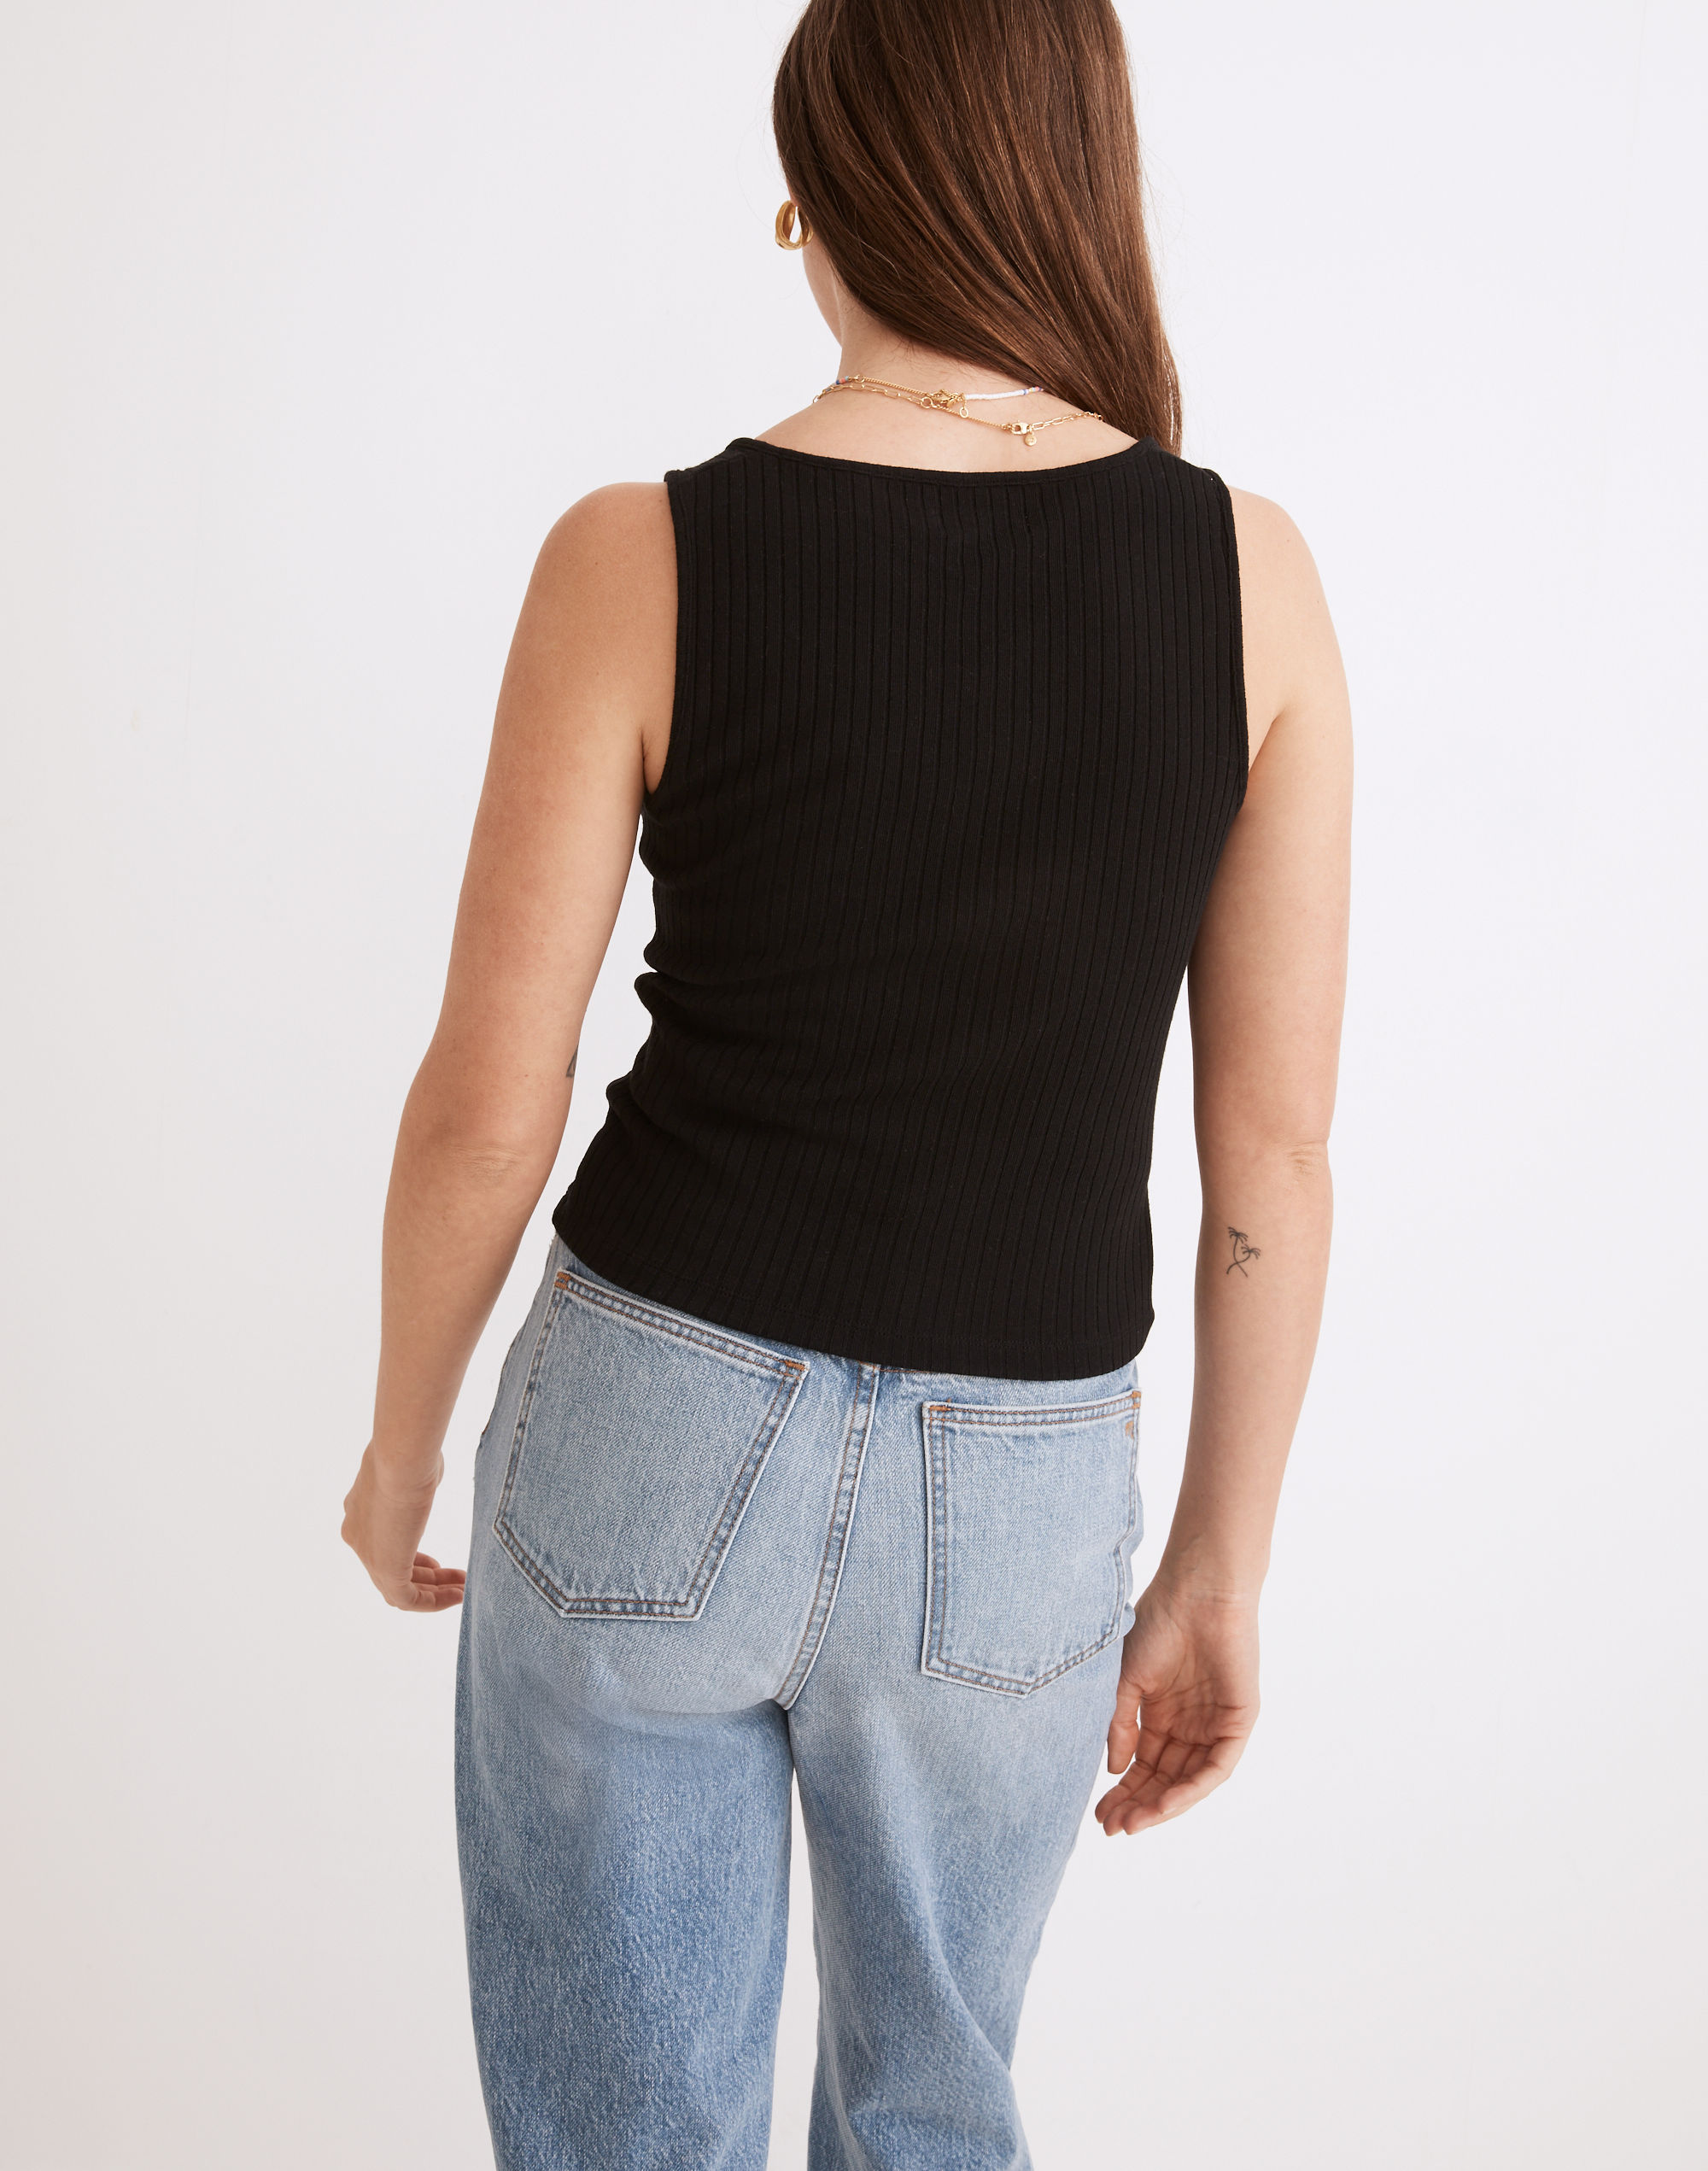 Madewell Built in Bra Ribbed Crop Tank Top Black Size XL NEW - $19 New With  Tags - From Stacie